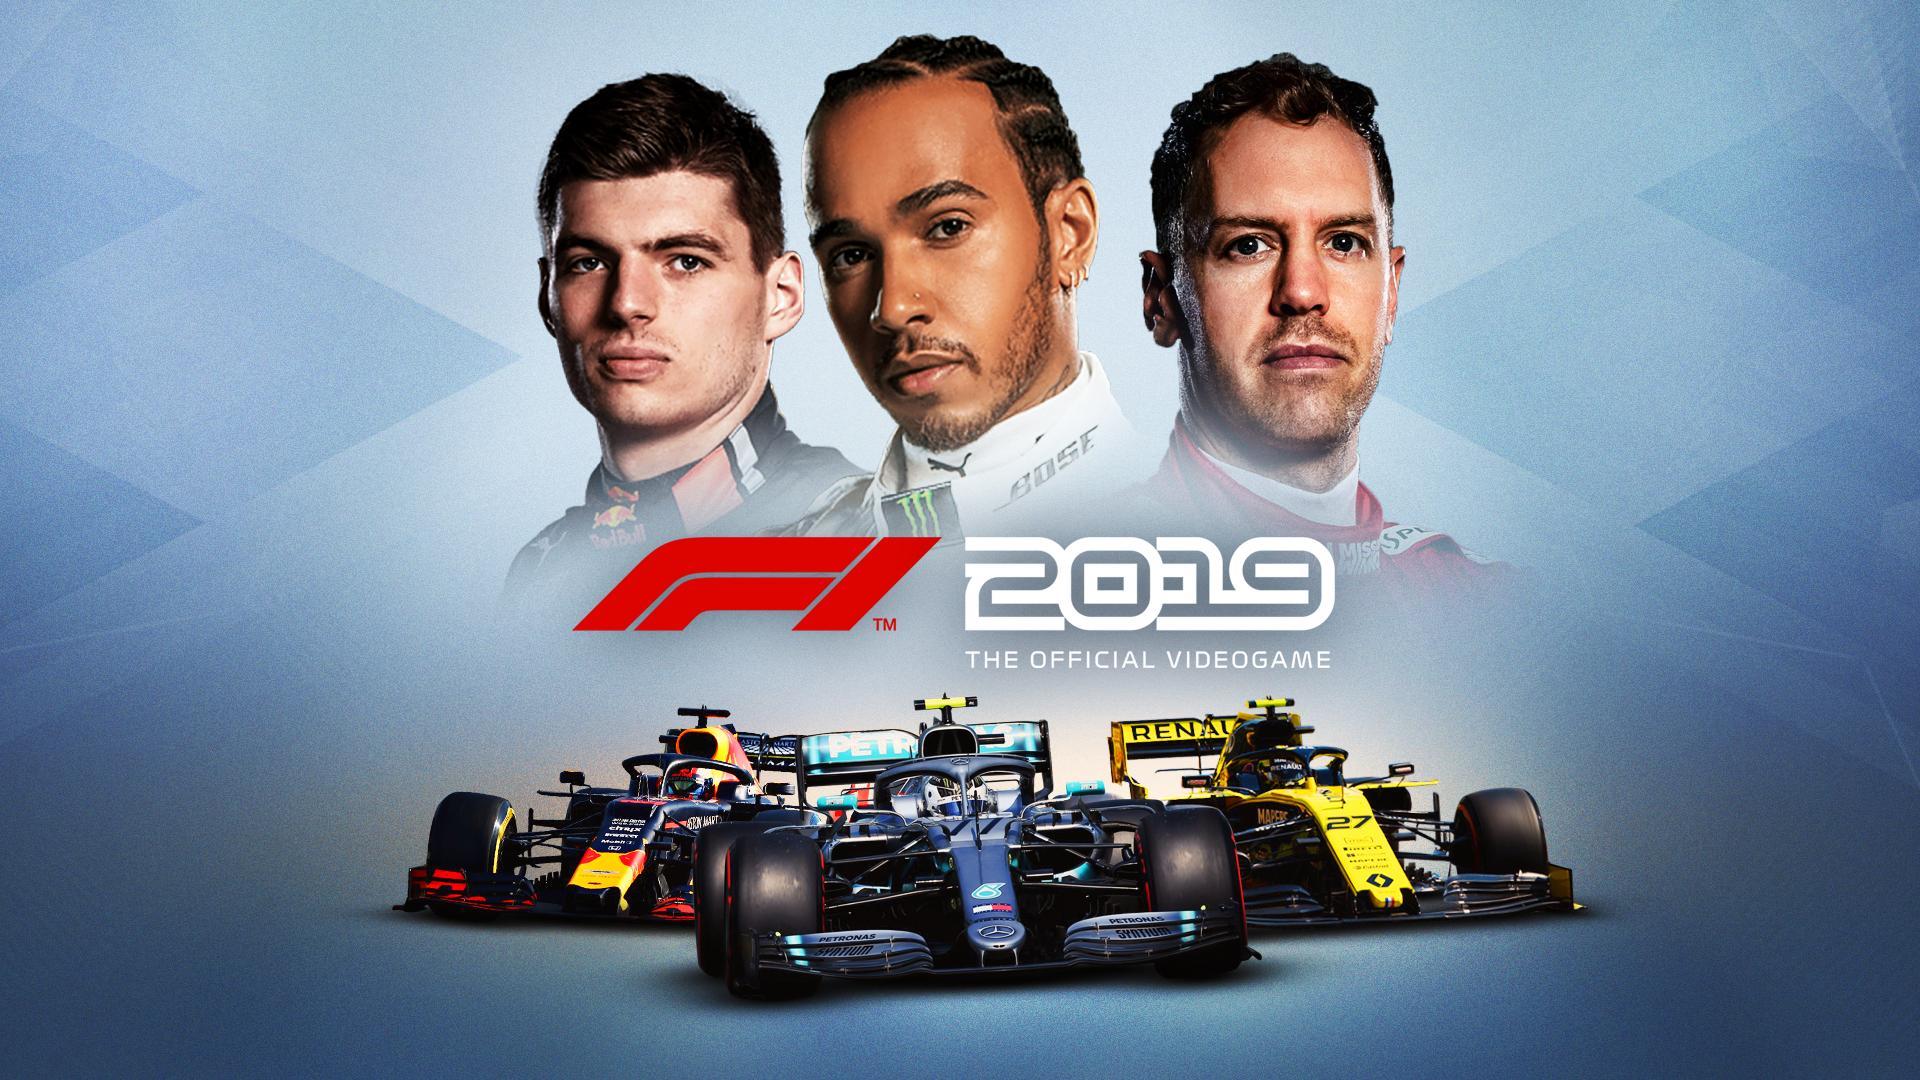 Defeat Your Rivals And Celebrate Victory With The F1 2019 TV Advert